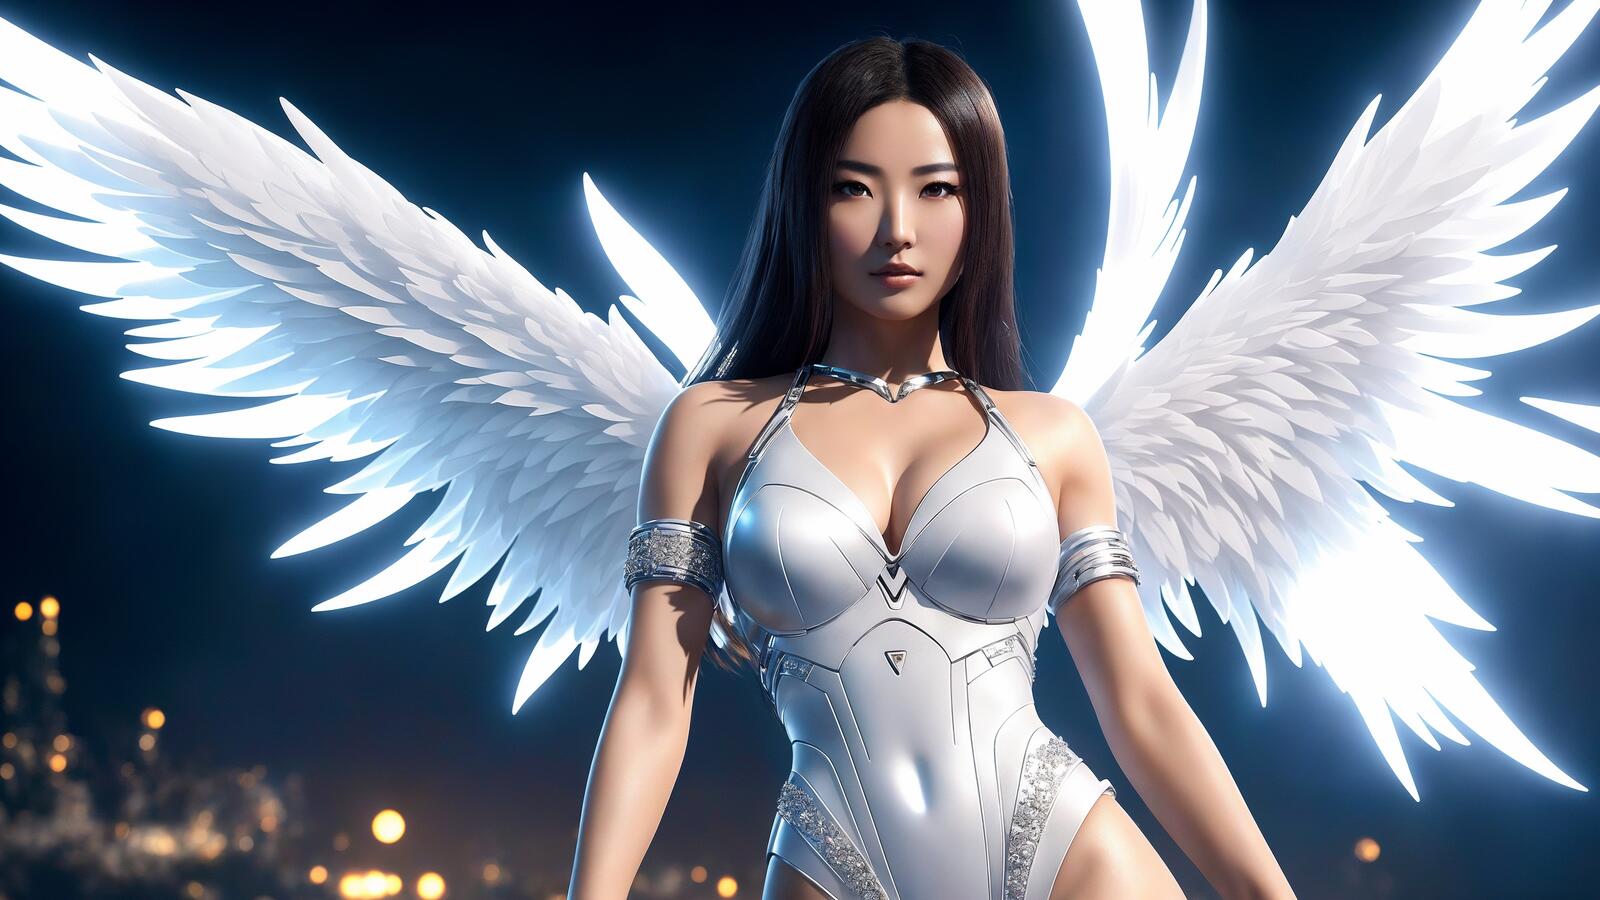 Free photo An angel with an Asian appearance